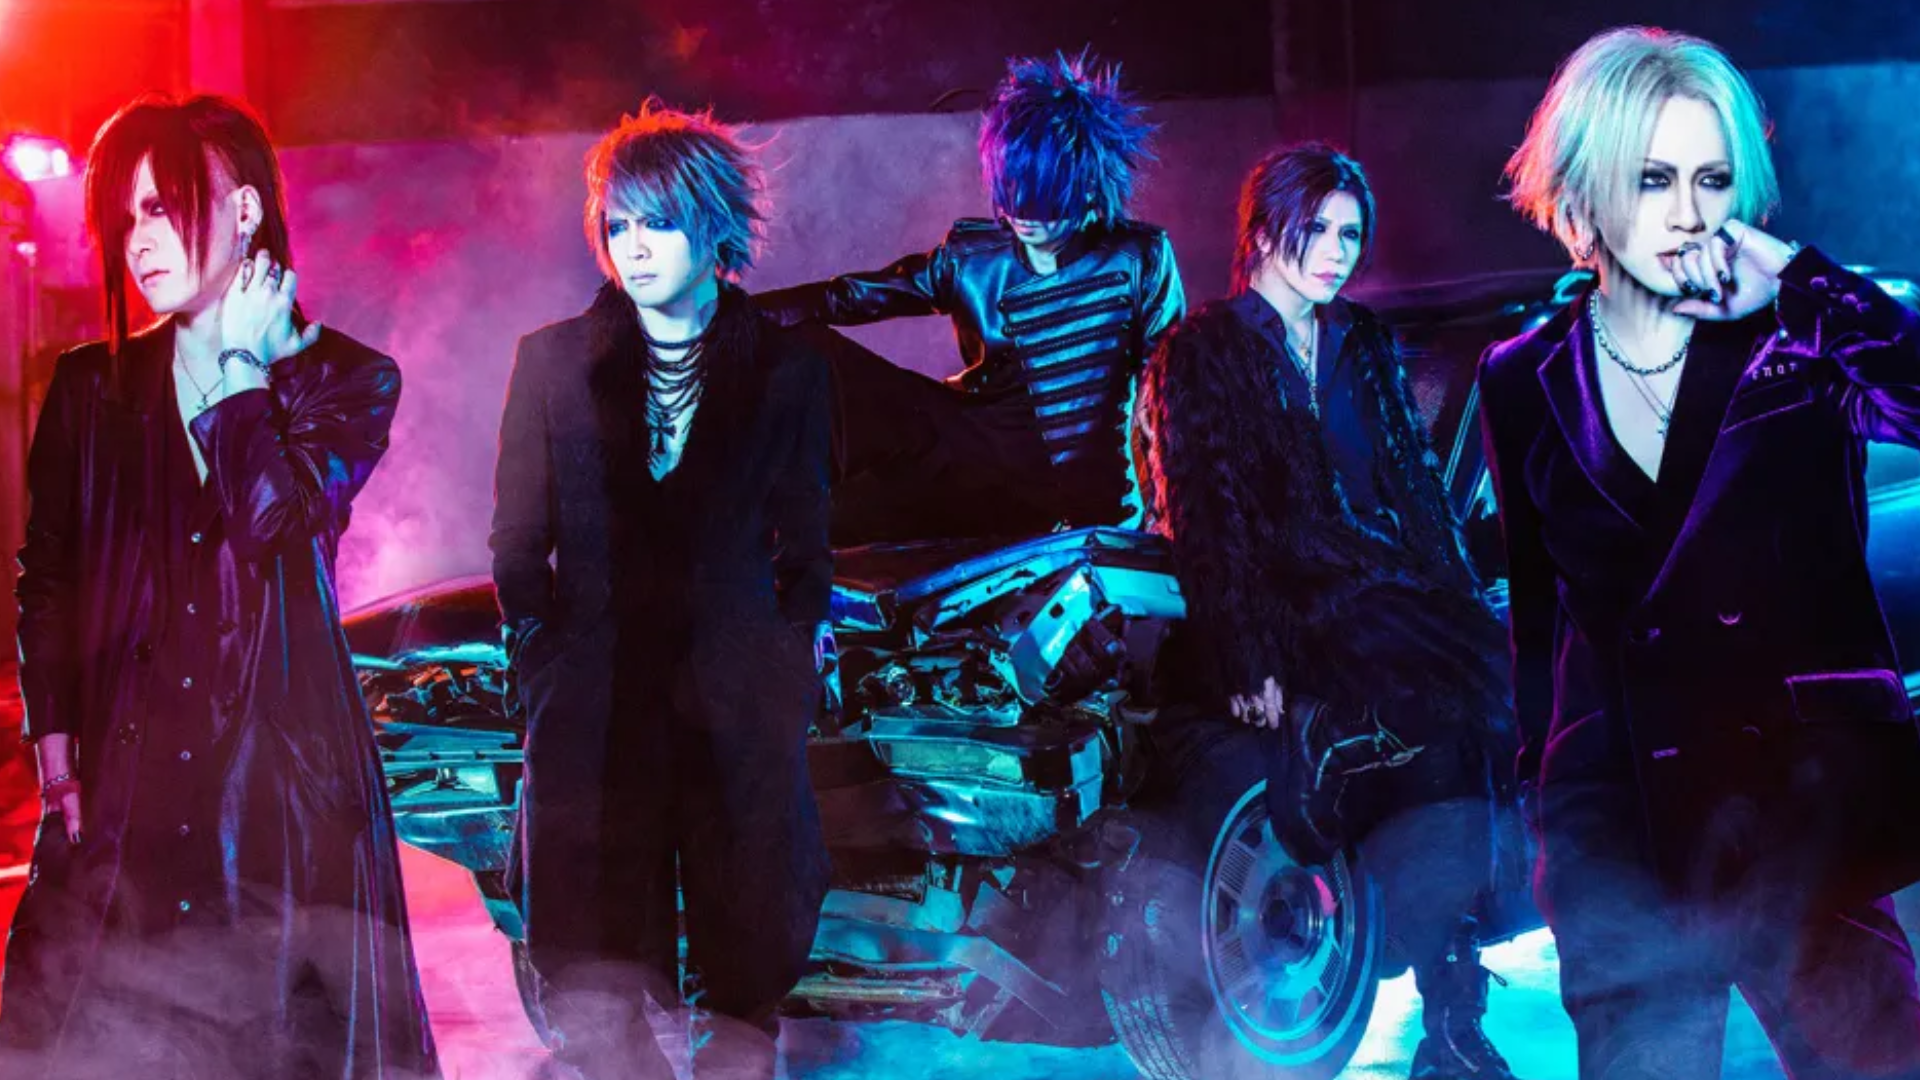 <p>Reita’s death is a massive one to the J-rock world, given his legacy as one of Japan’s most prolific bassists and rockers. He is the second member of The Gazette to have passed, with the first being Yune, who passed on 28 December 2022.</p> <p>Image: Sony Music</p> <p><a href="https://www.msn.com/en-us/channel/source/Showbizz%20Daily%20English/sr-vid-w8hcuhvu3f8qr5wn5rk8xhsu5x8irqrgtxcypg4uxvn7tq9vkkfa?cvid=cddbc5c4fc9748a196a59c4cb5f3d12a&ei=7" rel="noopener">Follow Showbizz Daily to see the best photo galleries every day</a></p>